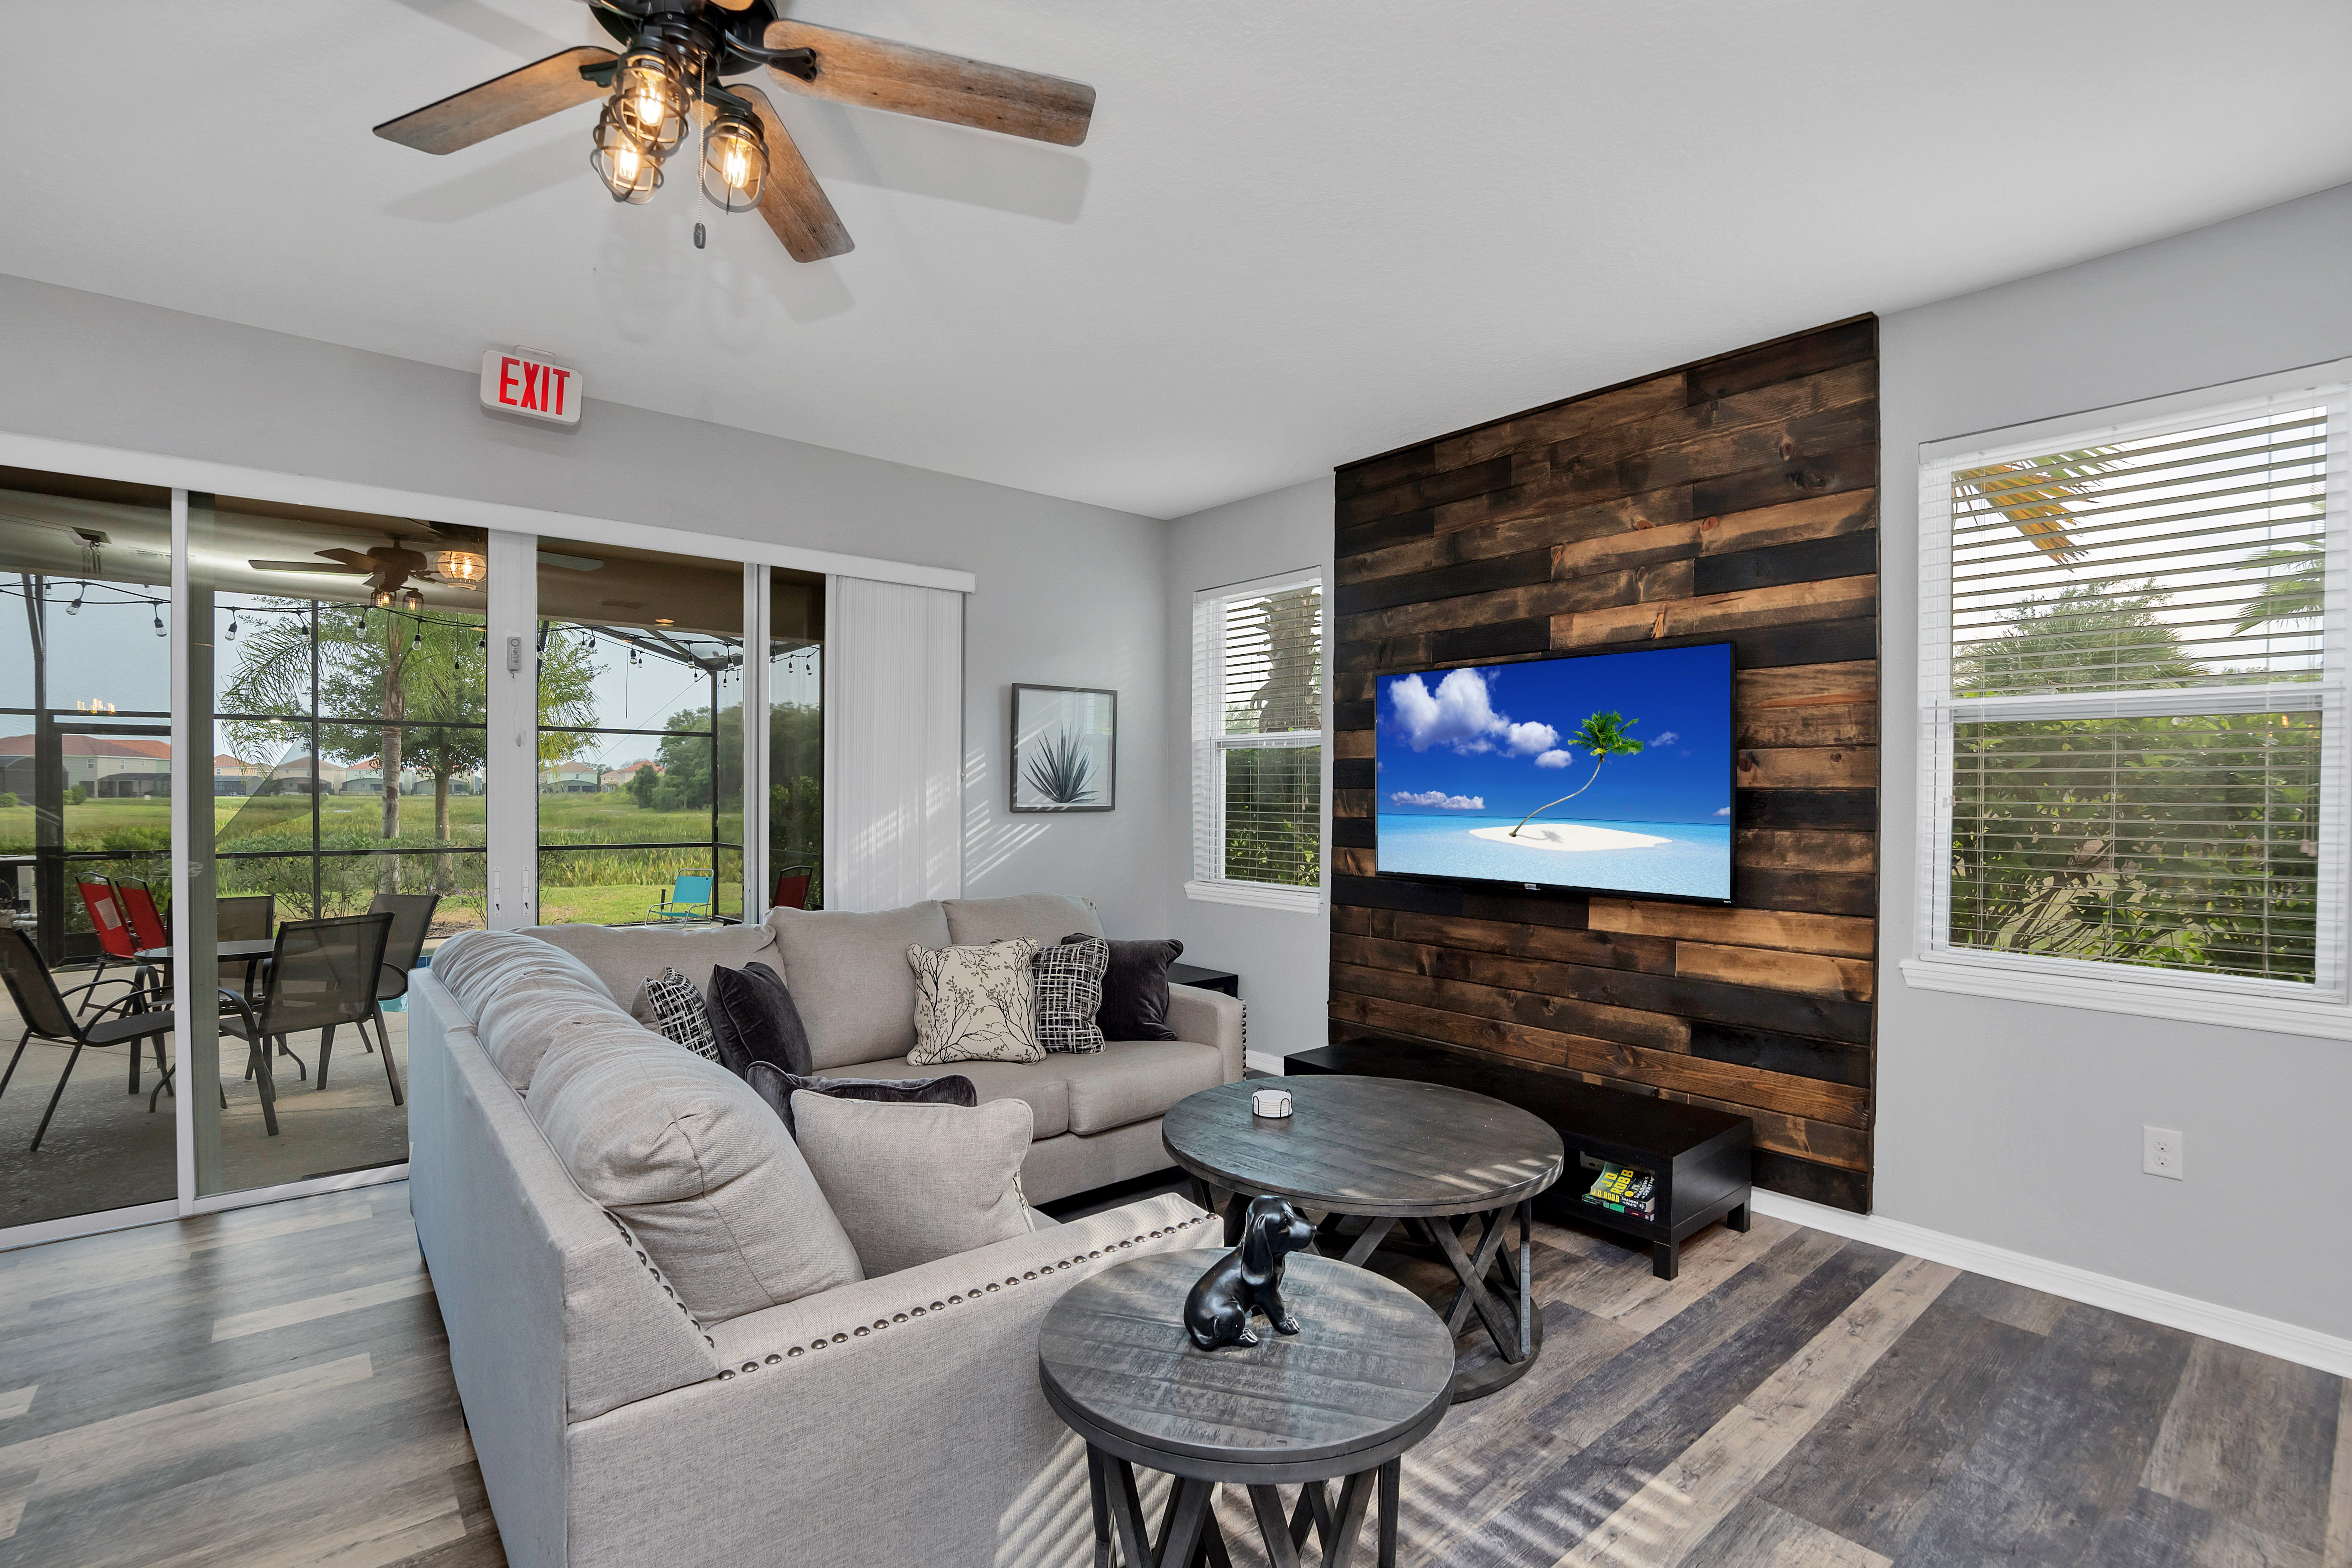 Inviting living area of the townhouse in Davenport Florida - Cozy seating area conducive to relaxation and socializing - Smart TV and netflix - Chic and contemporary living room design with clean lines and modern furnishings